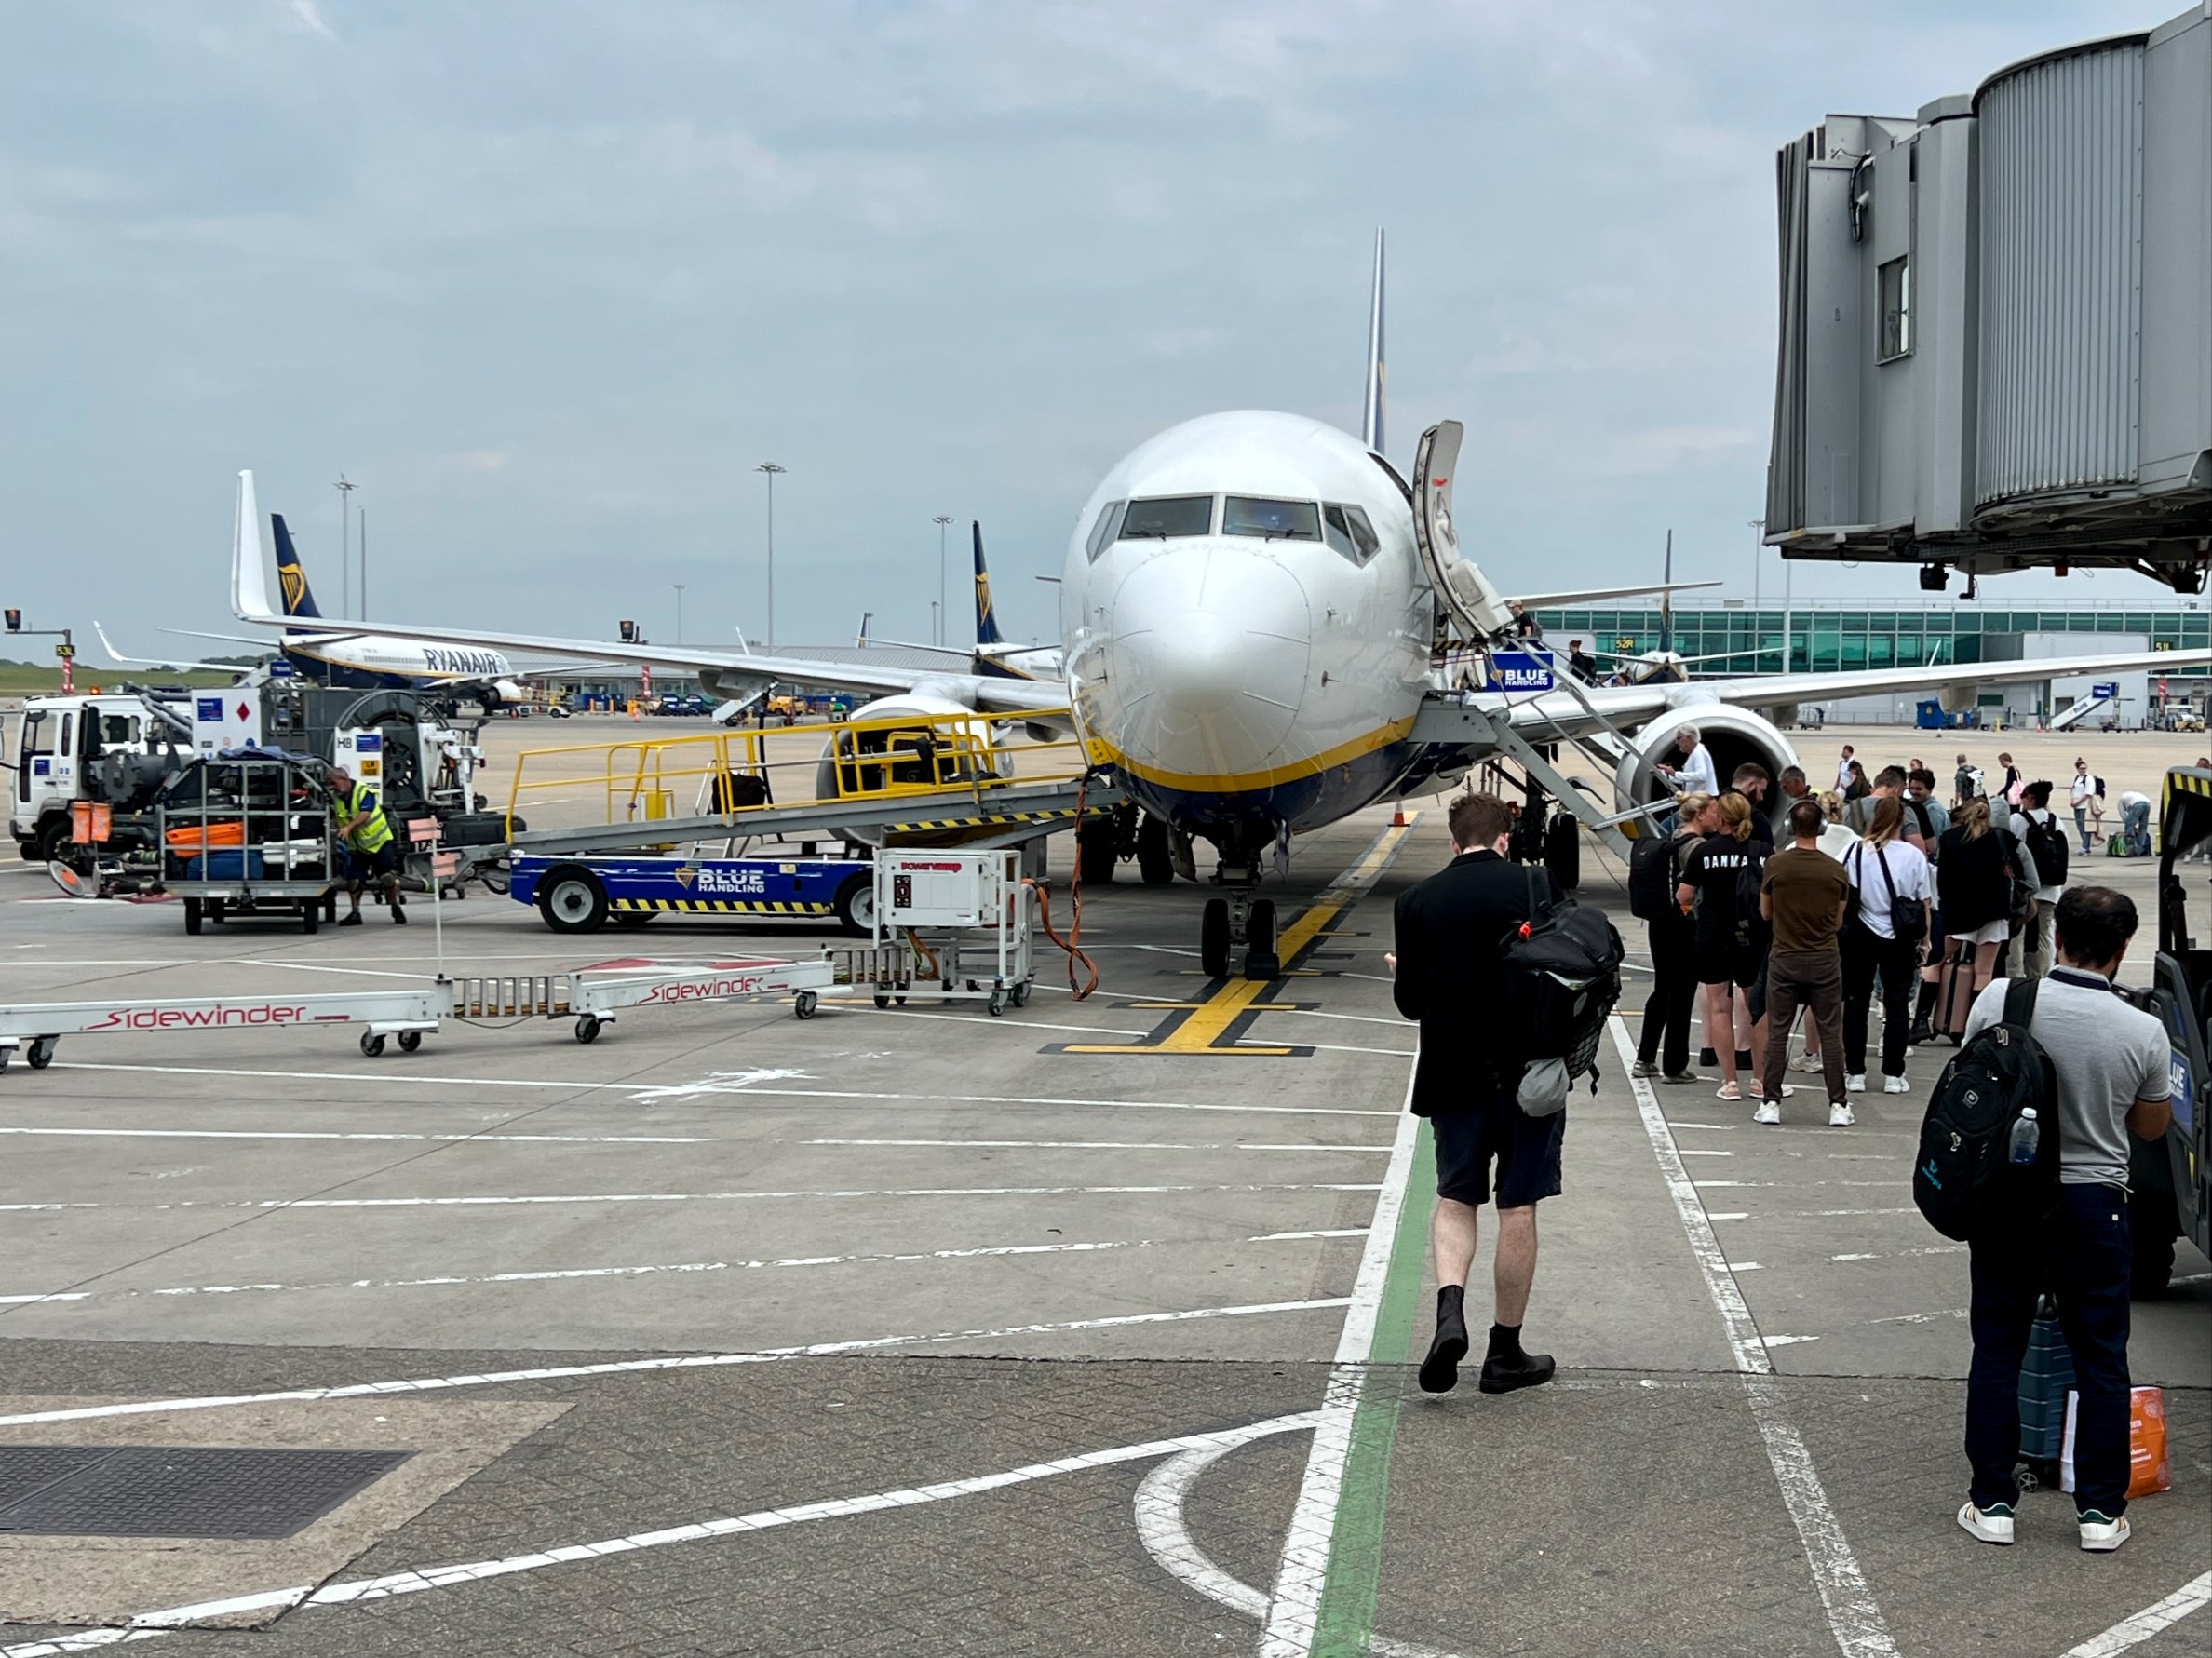 On the move: boarding a Ryanair plane at London Stansted while flights were being grounded at Gatwick and Heathrow